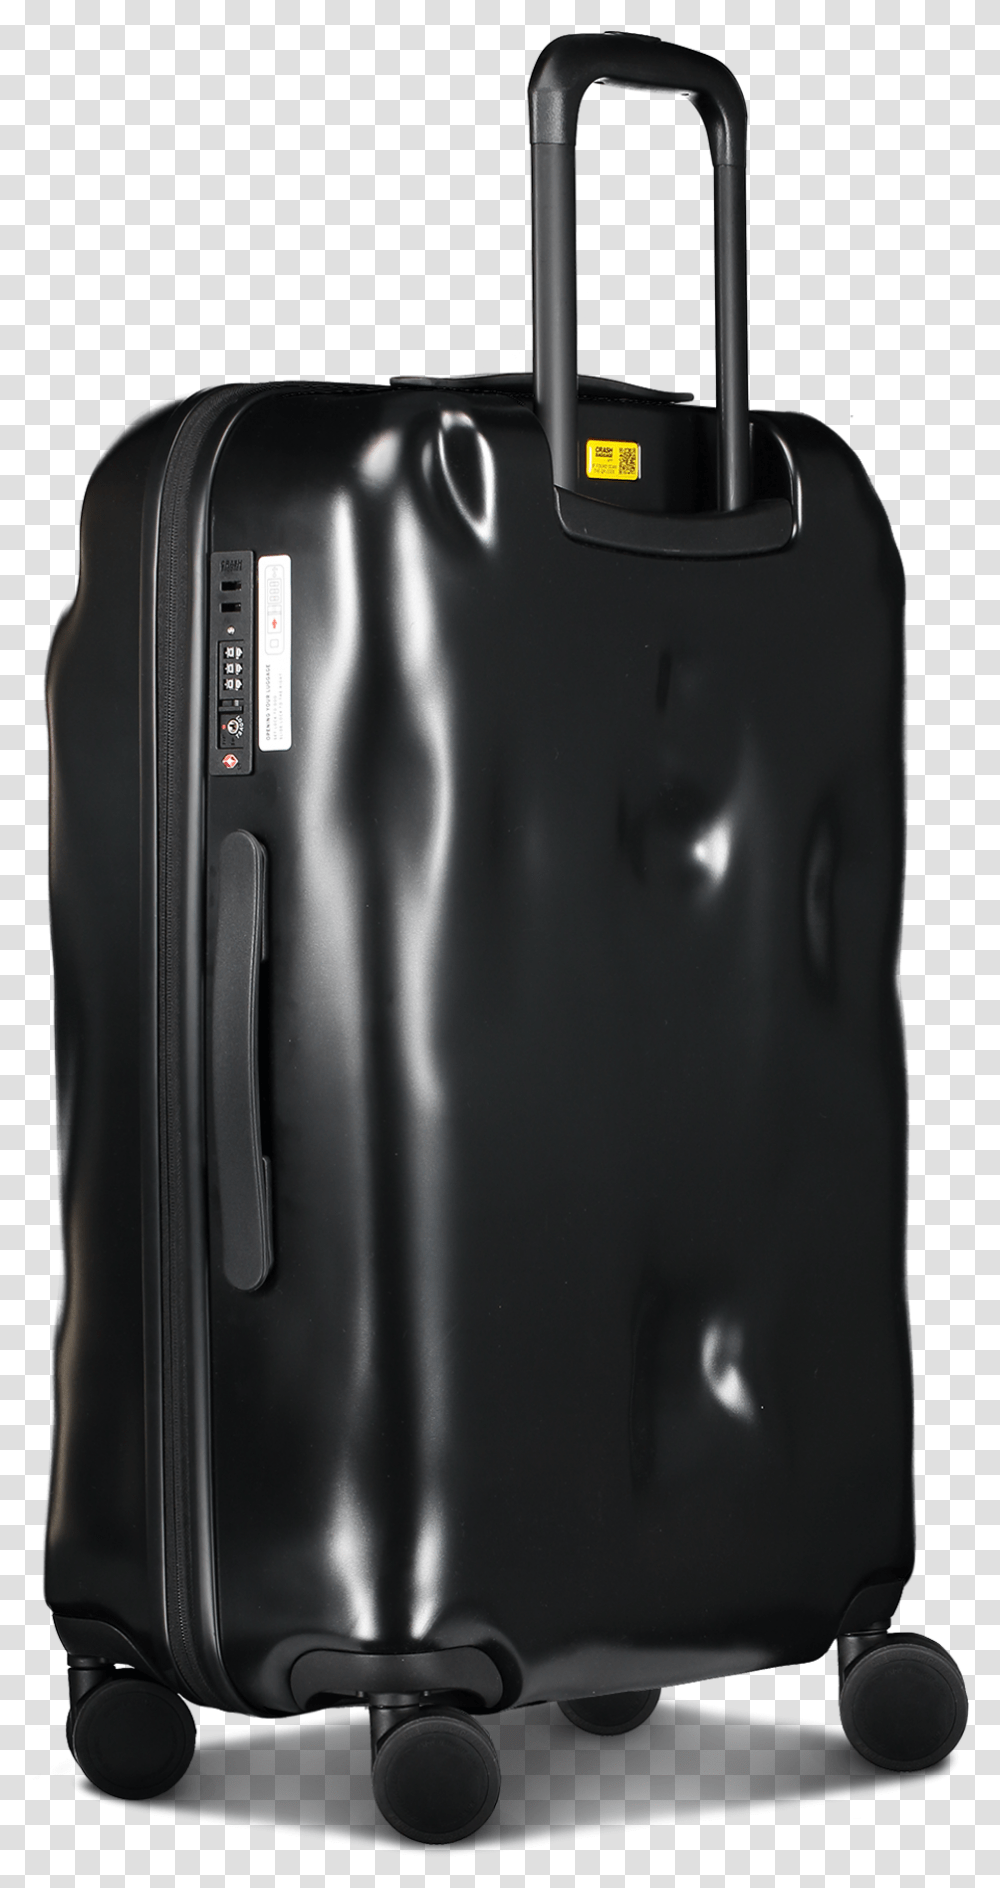 Baggage, Luggage, Suitcase Transparent Png